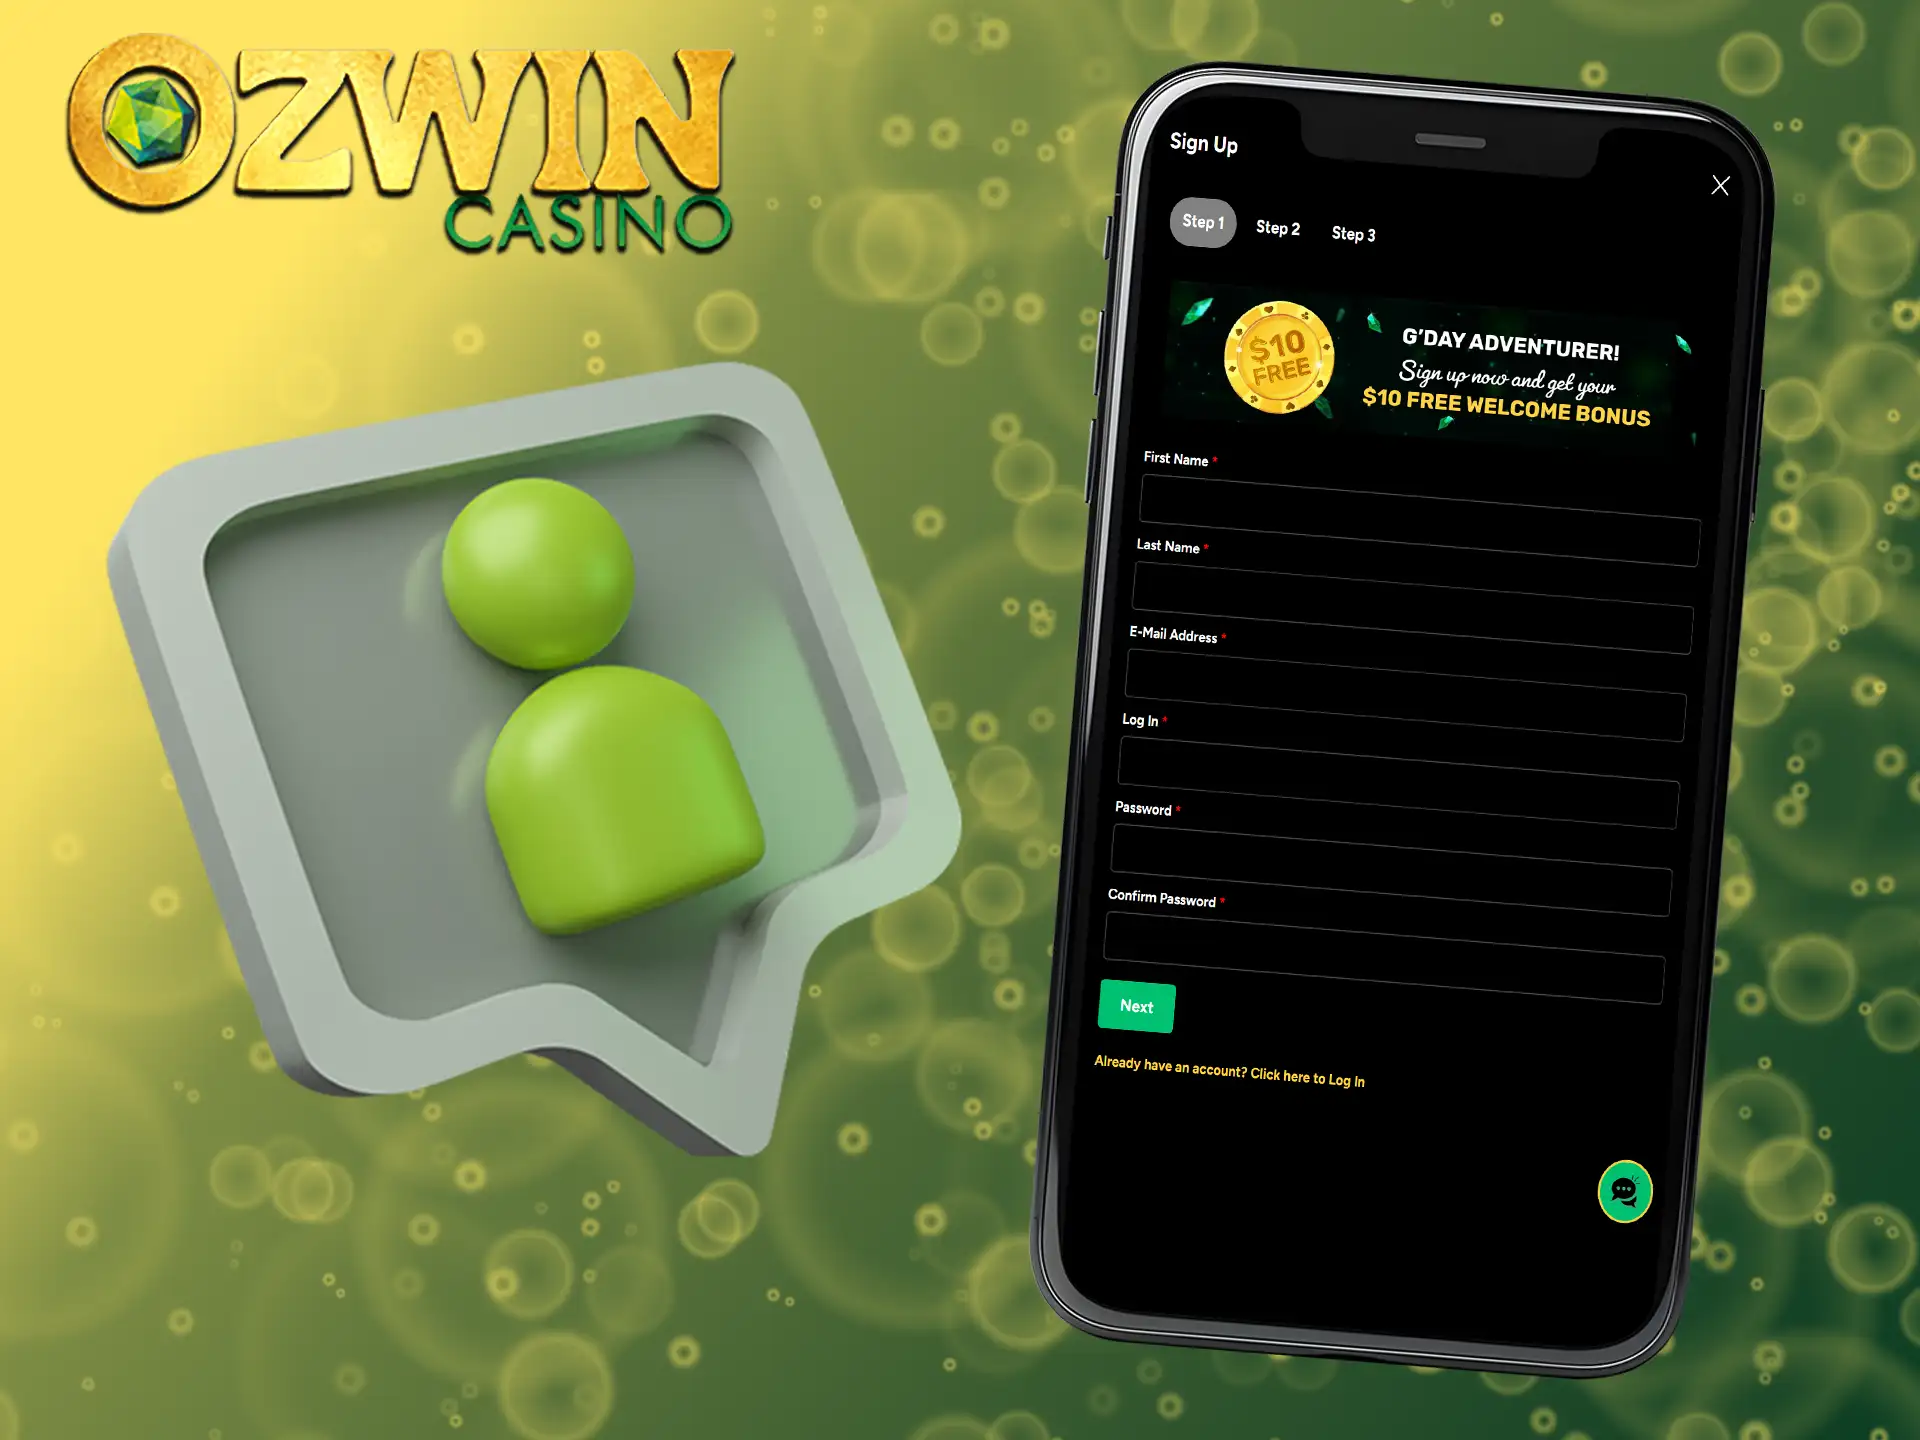 You can sign up for Ozwin Casino directly from your web browser on any Android or iOS device.